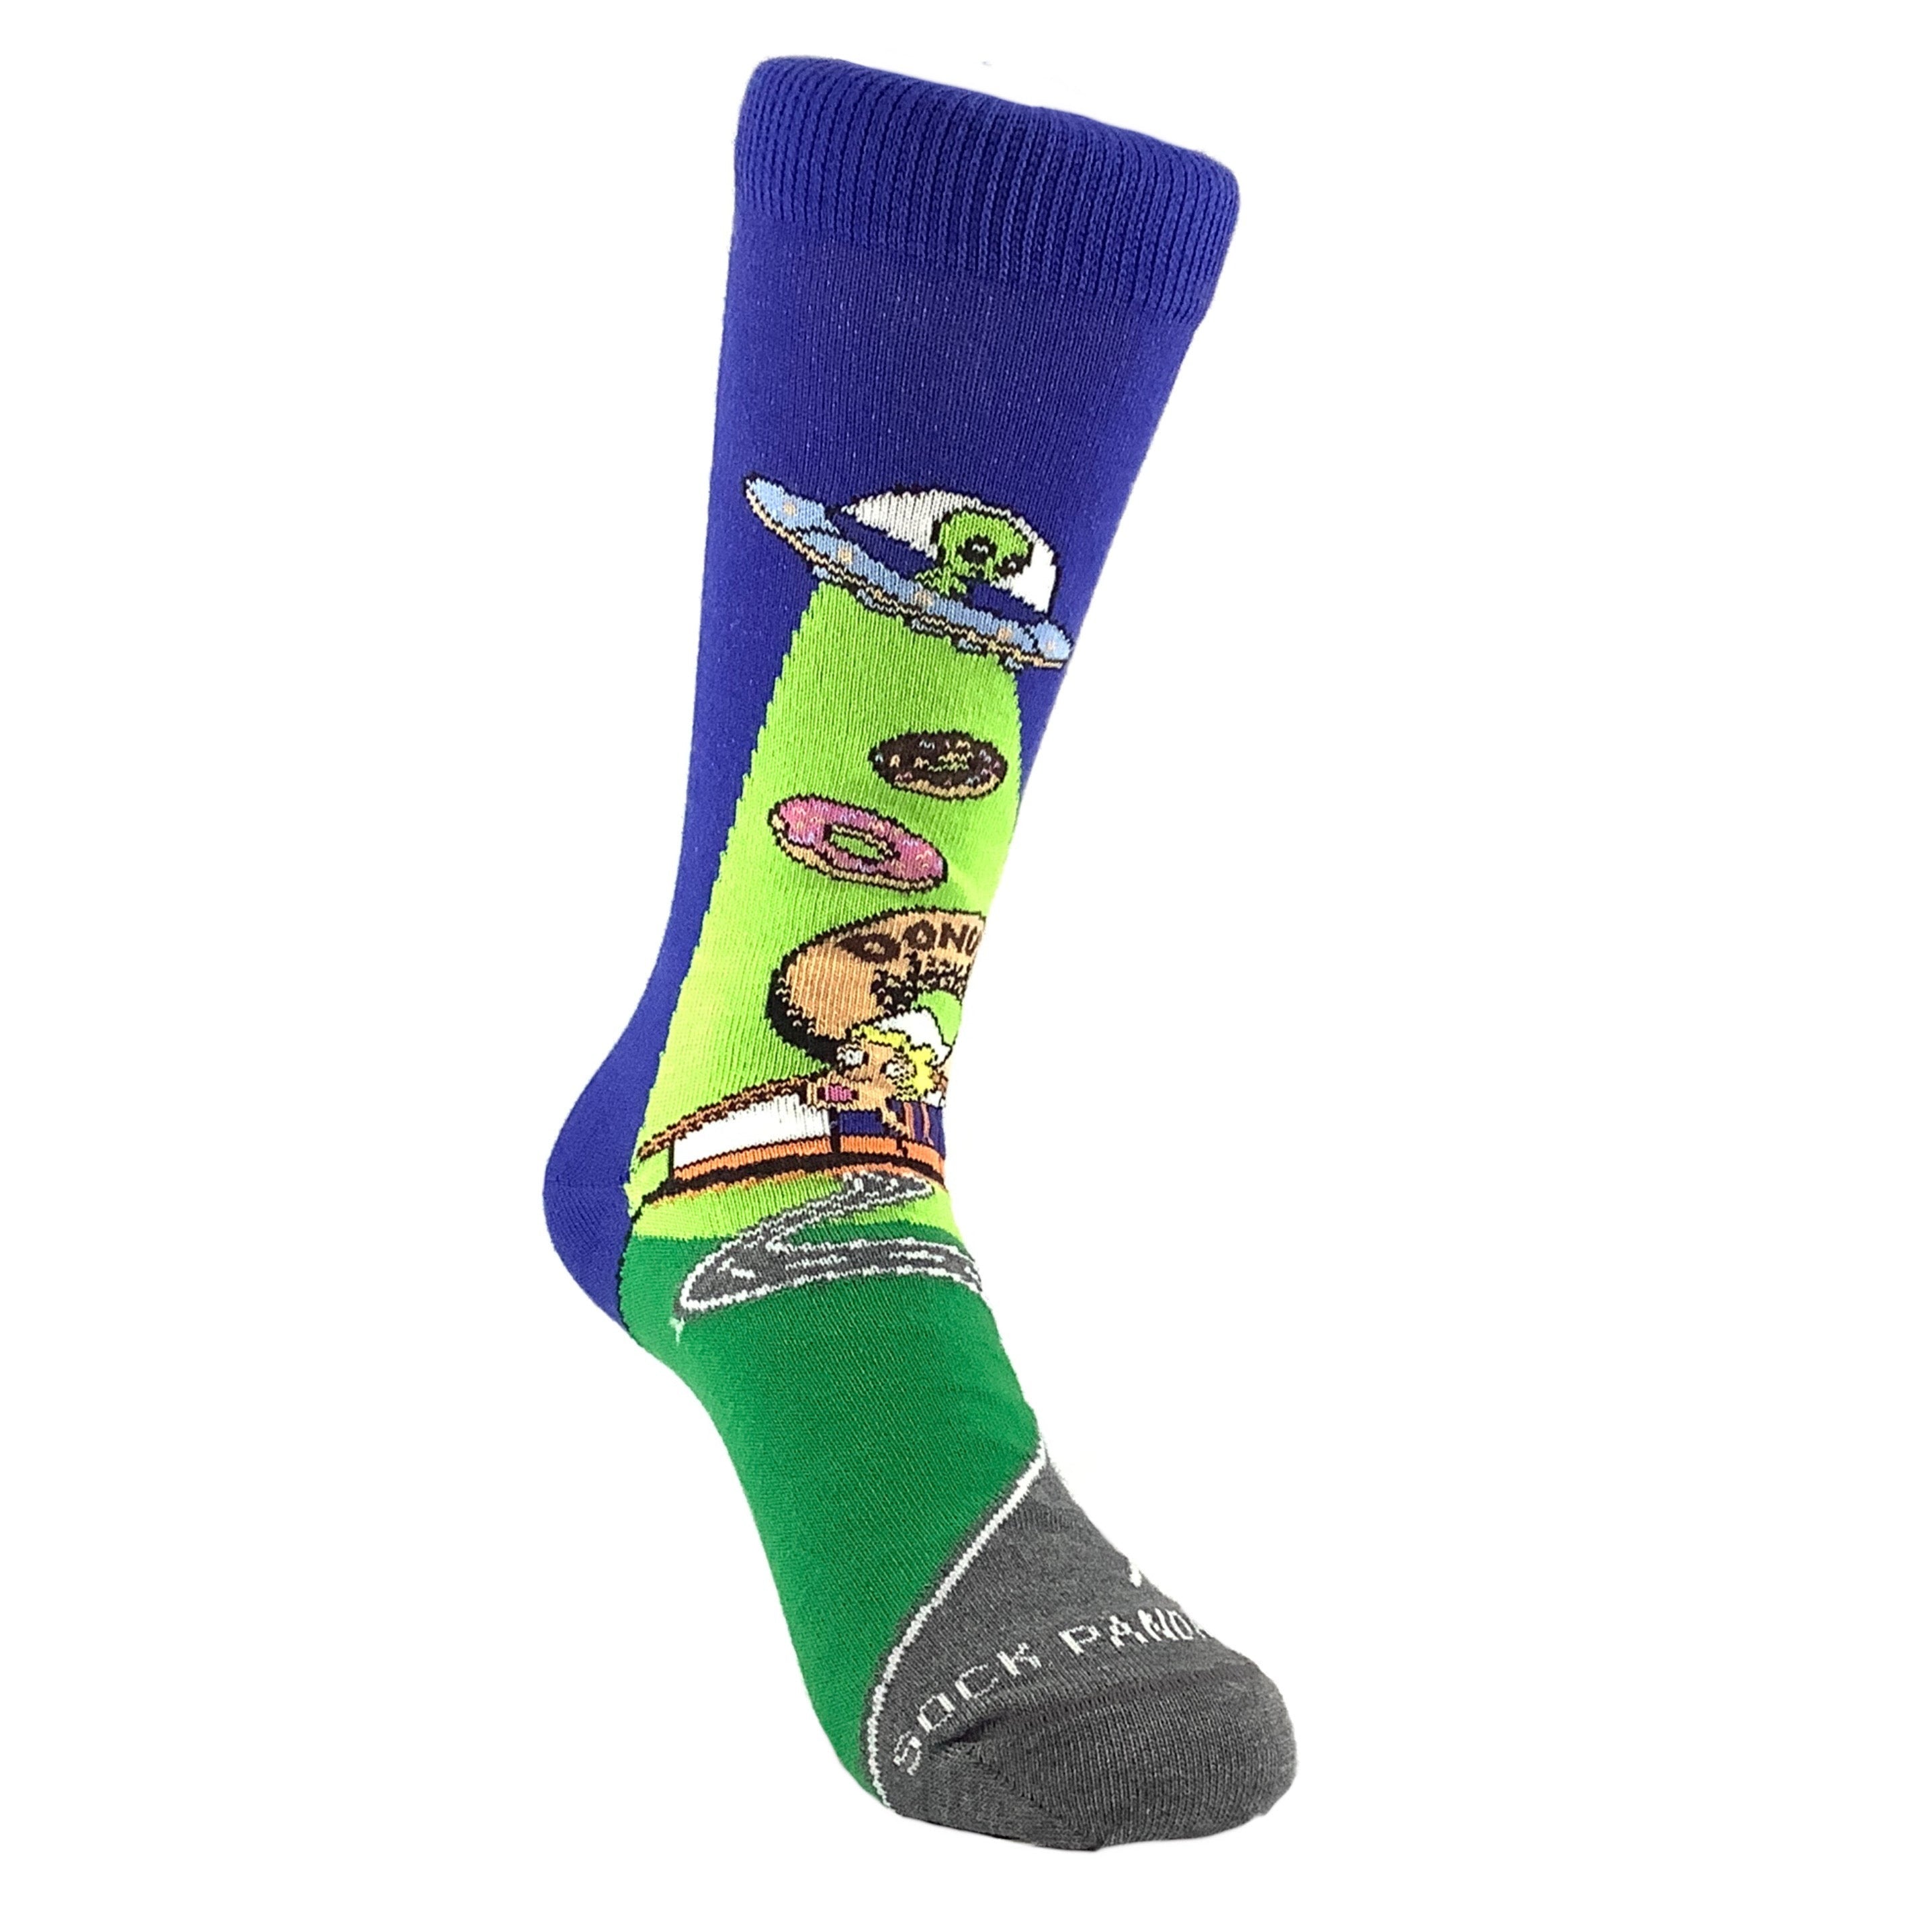 Alien Spaceships Love Donuts Socks from the Sock Panda (Adult Small)